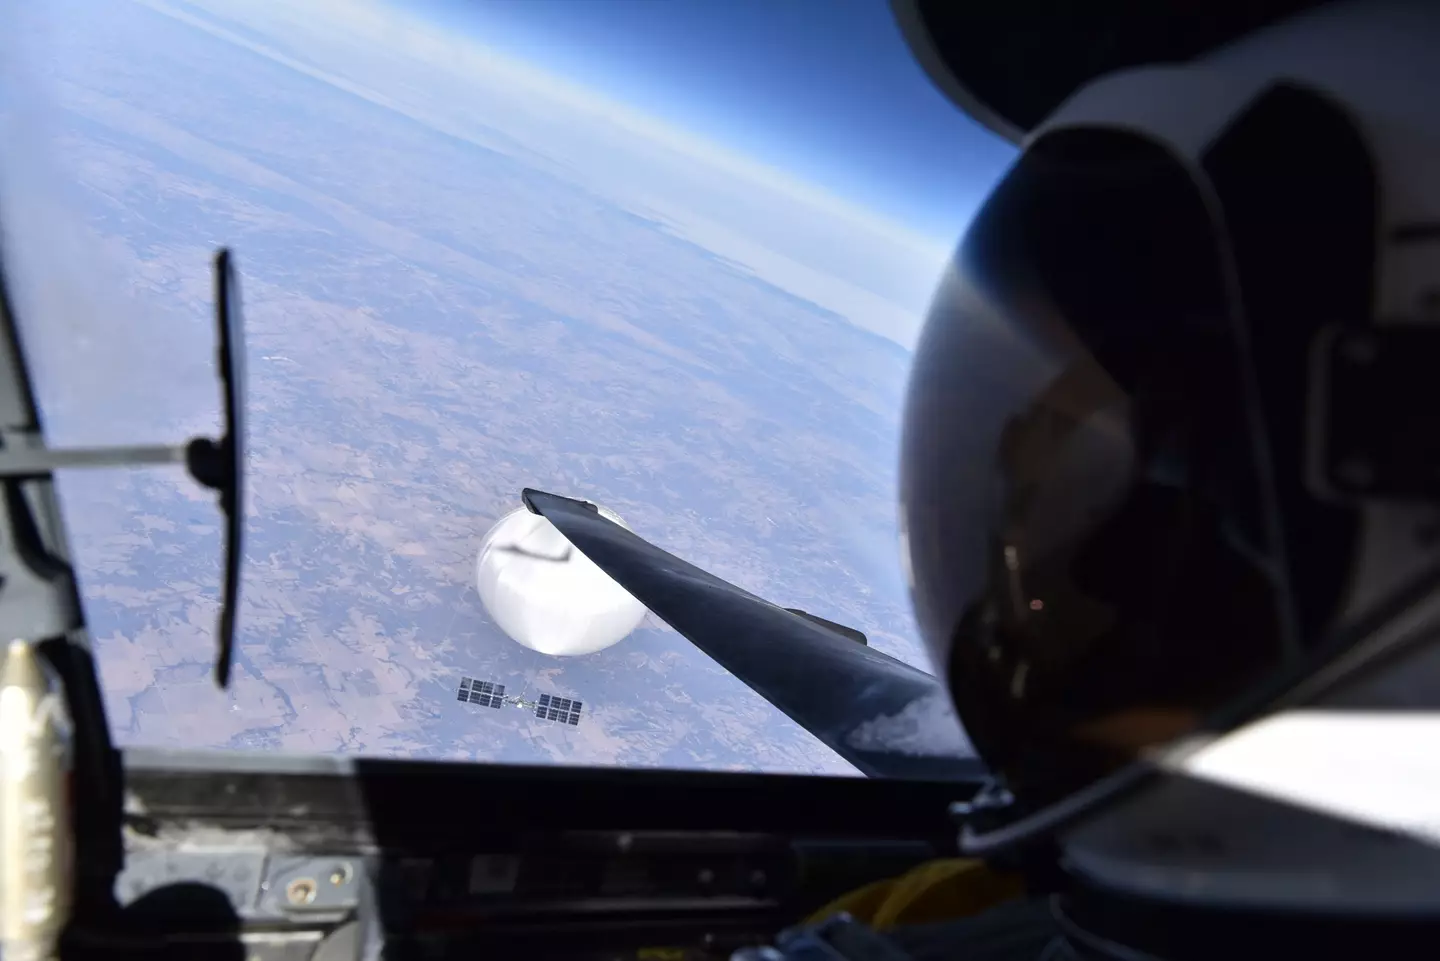 A US pilot took a selfie with the spy balloon before it was shot down.